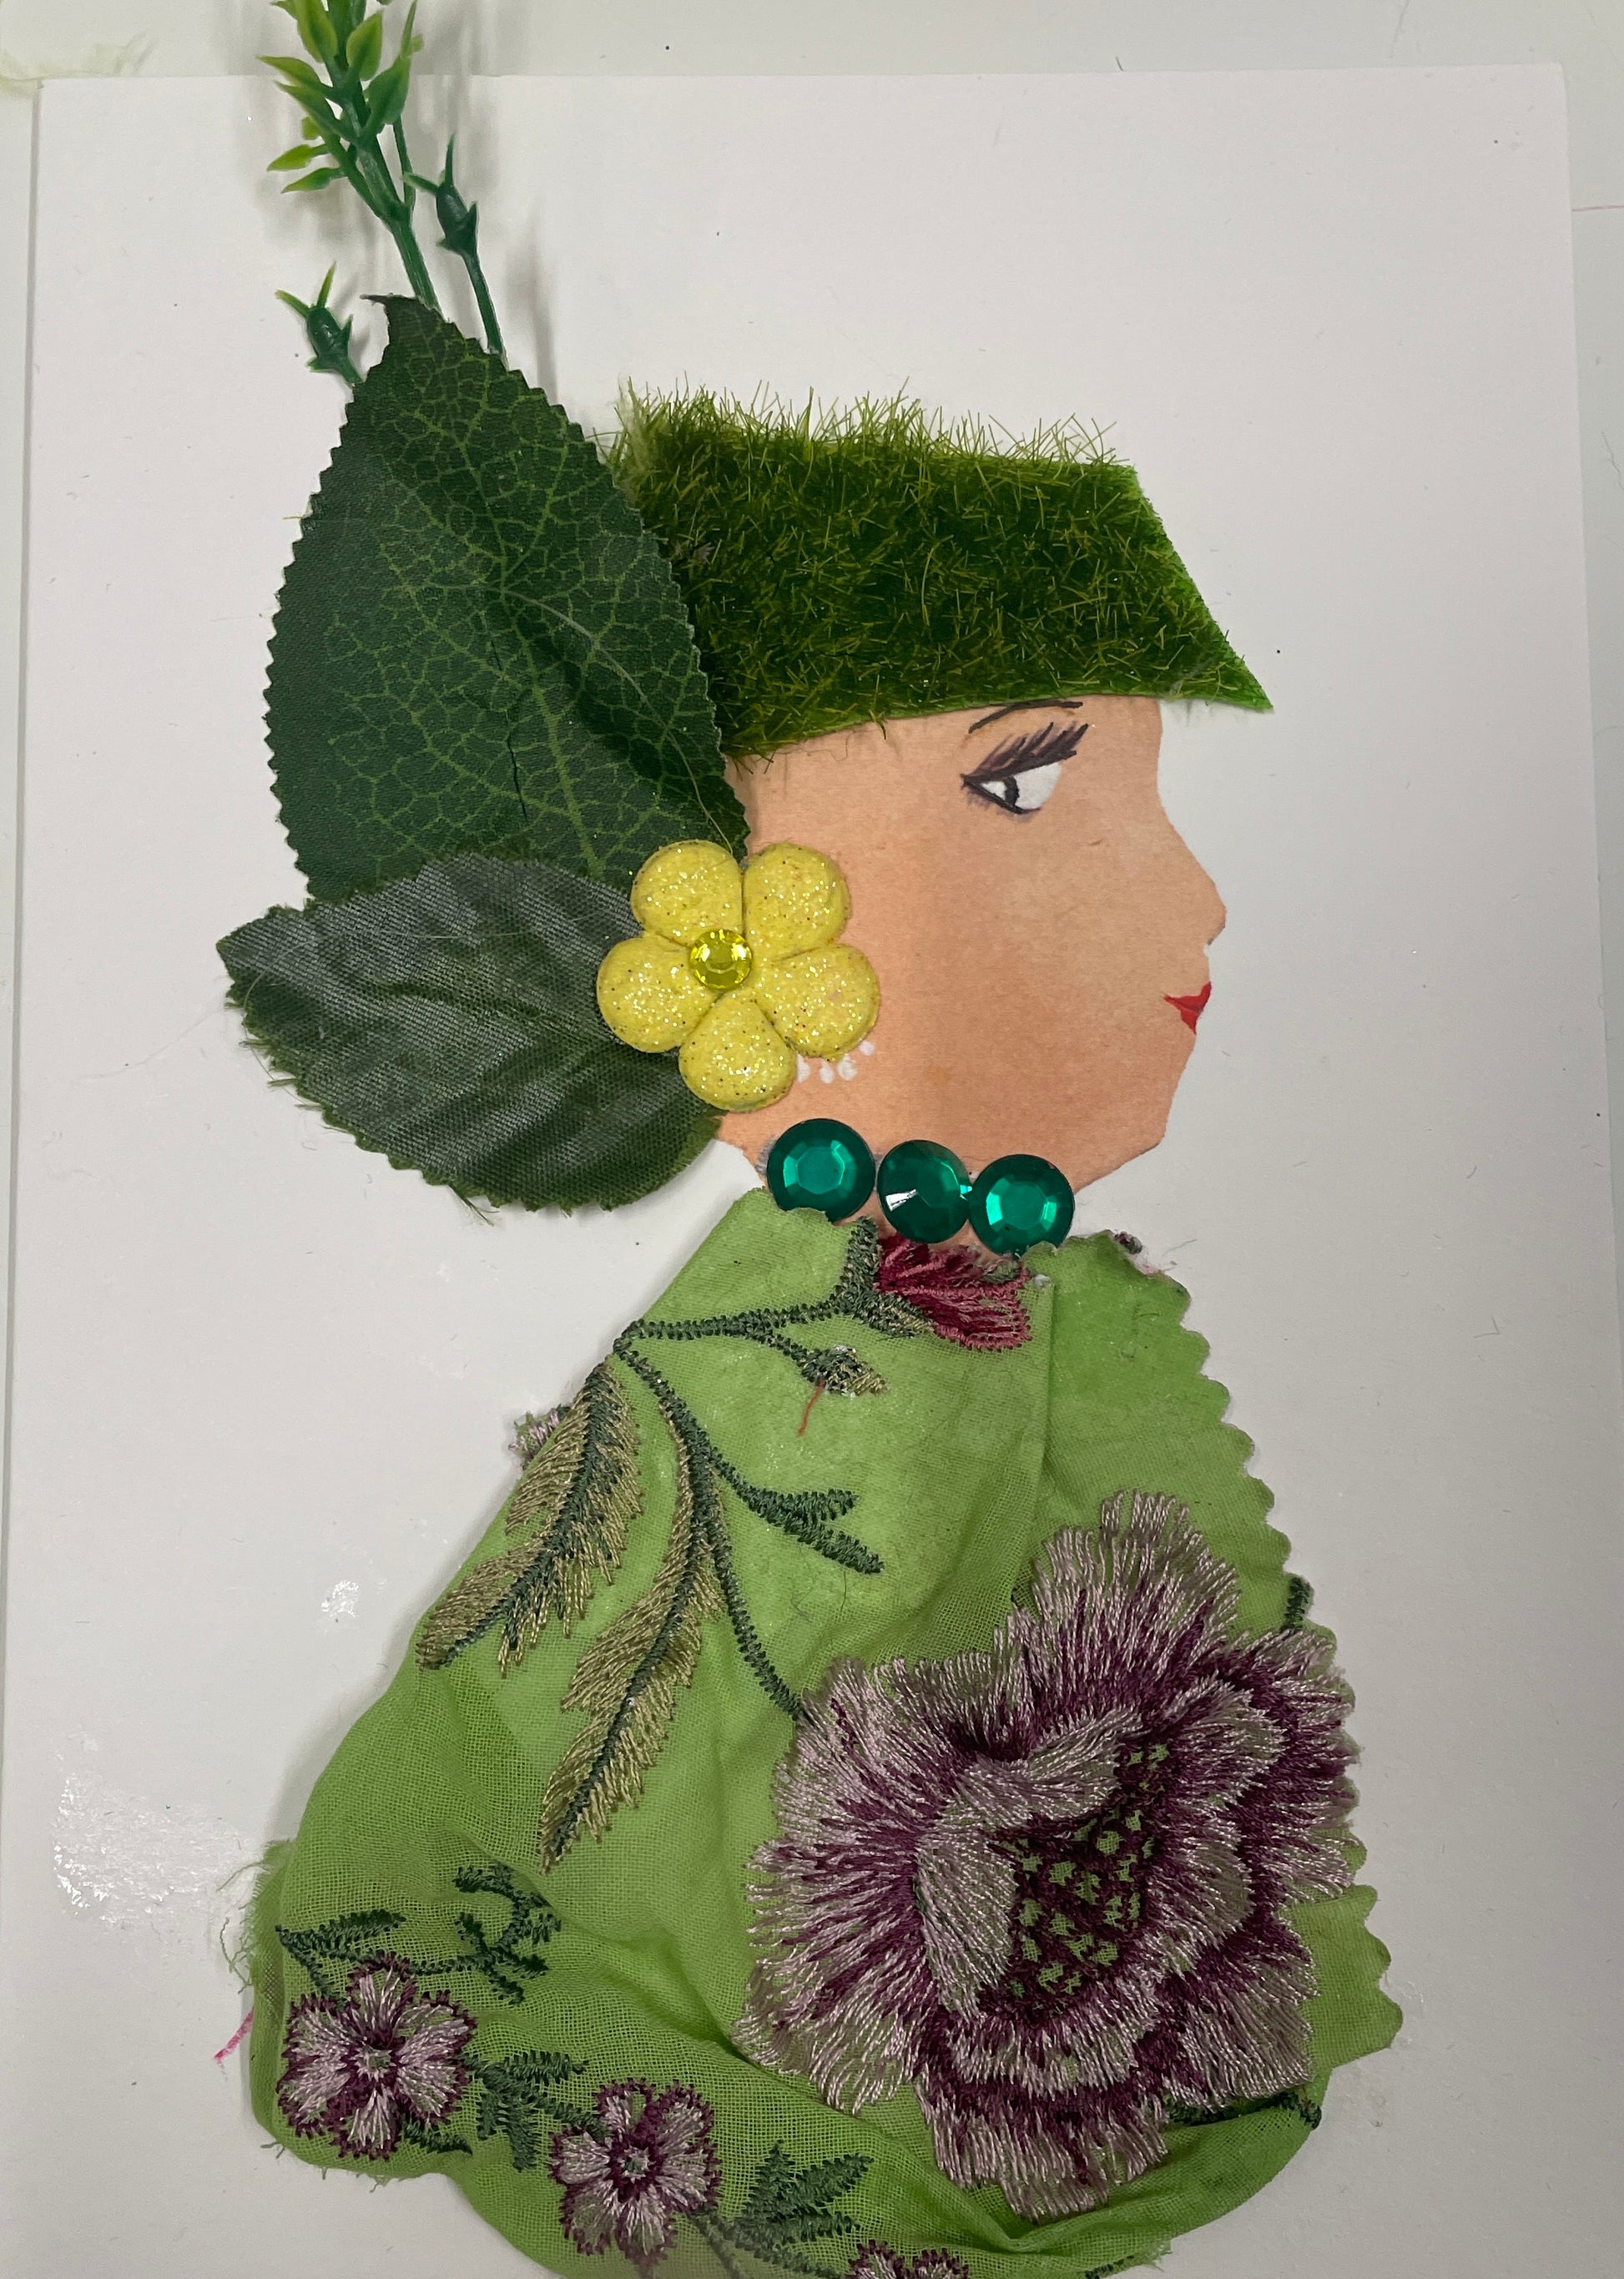 I designed this card of a woman named Super Garden. She has a white skin tone and wears a green grassy type covering for her hair.  cover, yellow flower earrings with a leaf extension, an emerald green necklace and a patterned blouse.